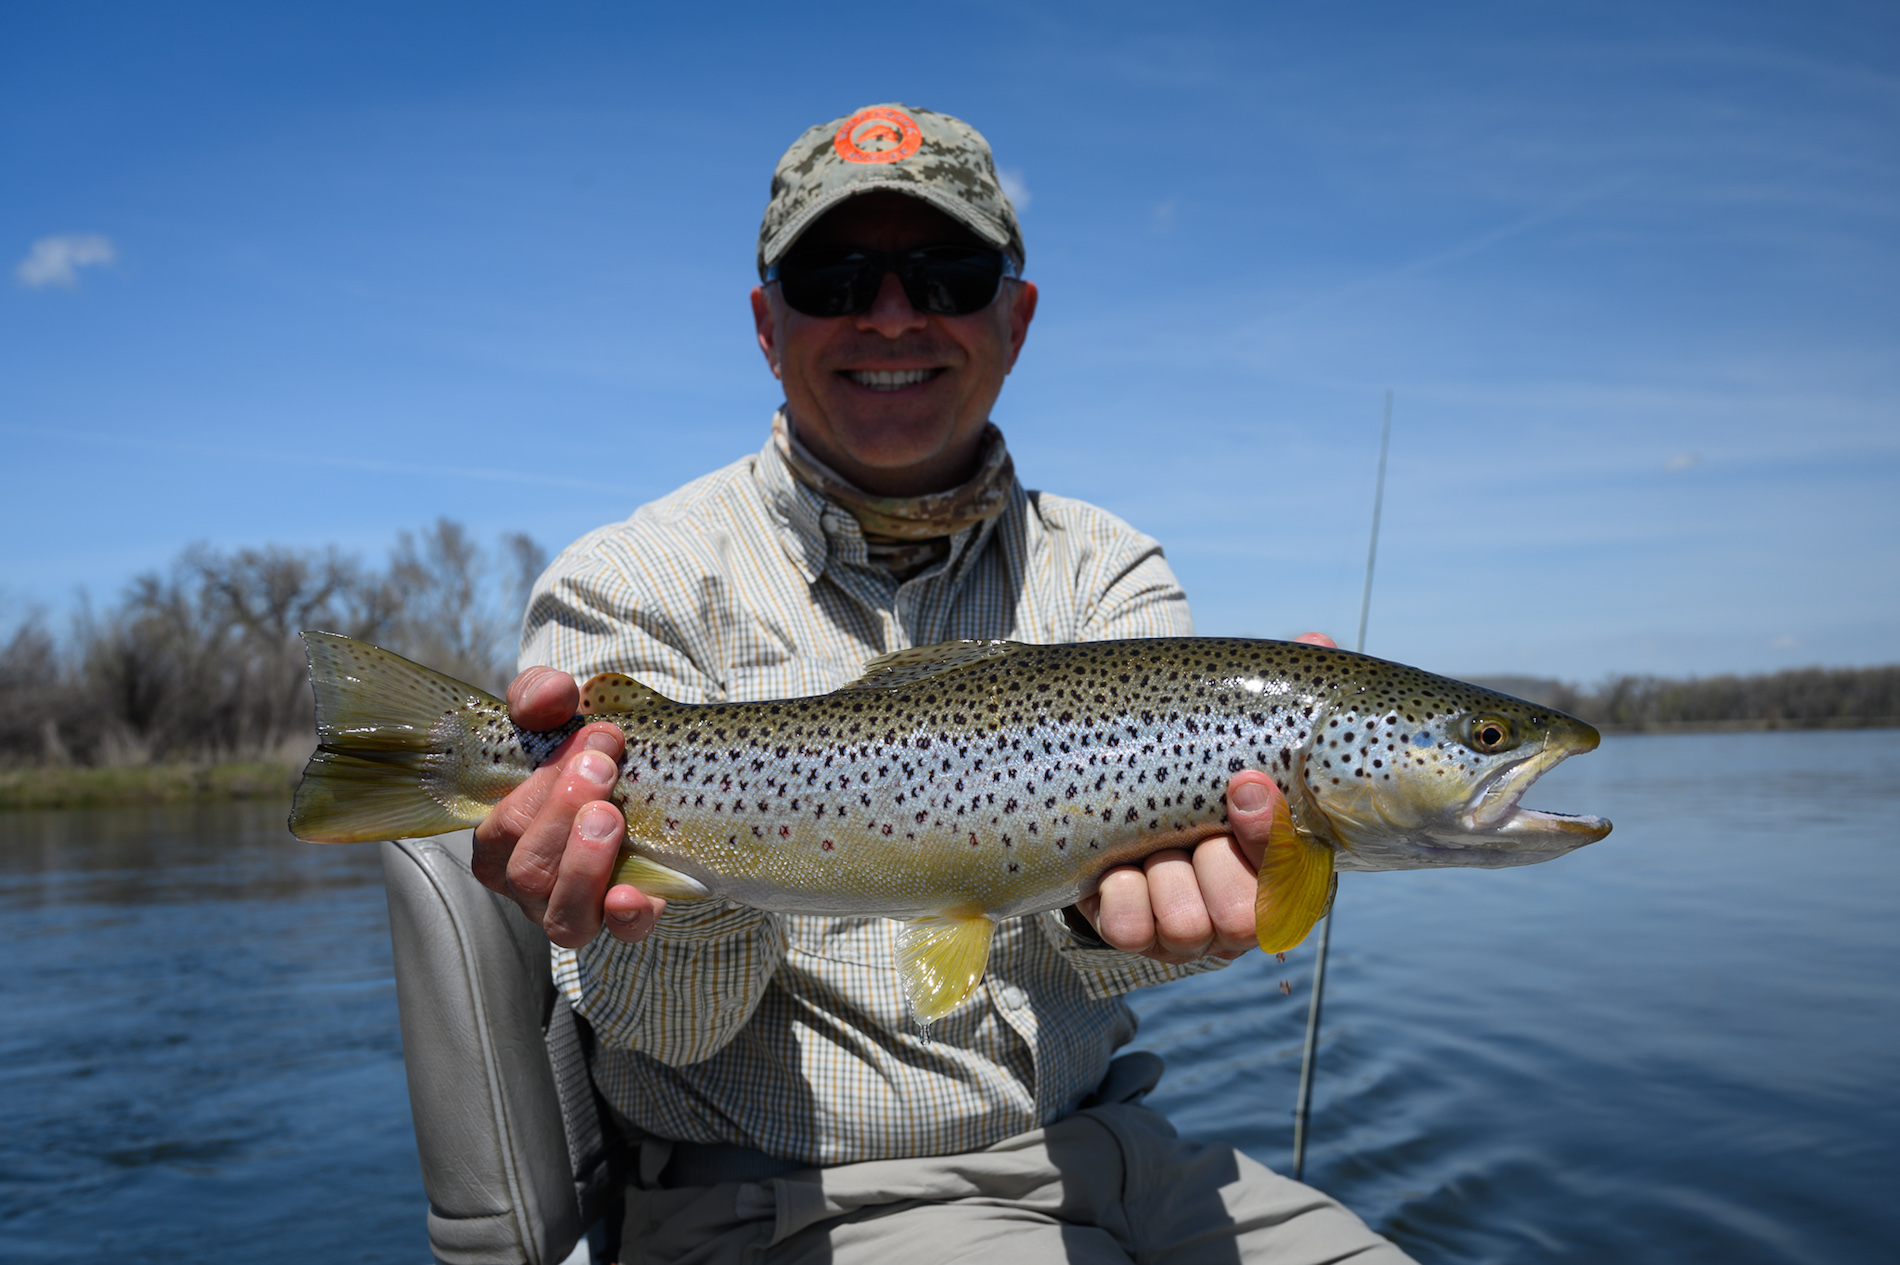 Angler with Brown trout on the Missouri River